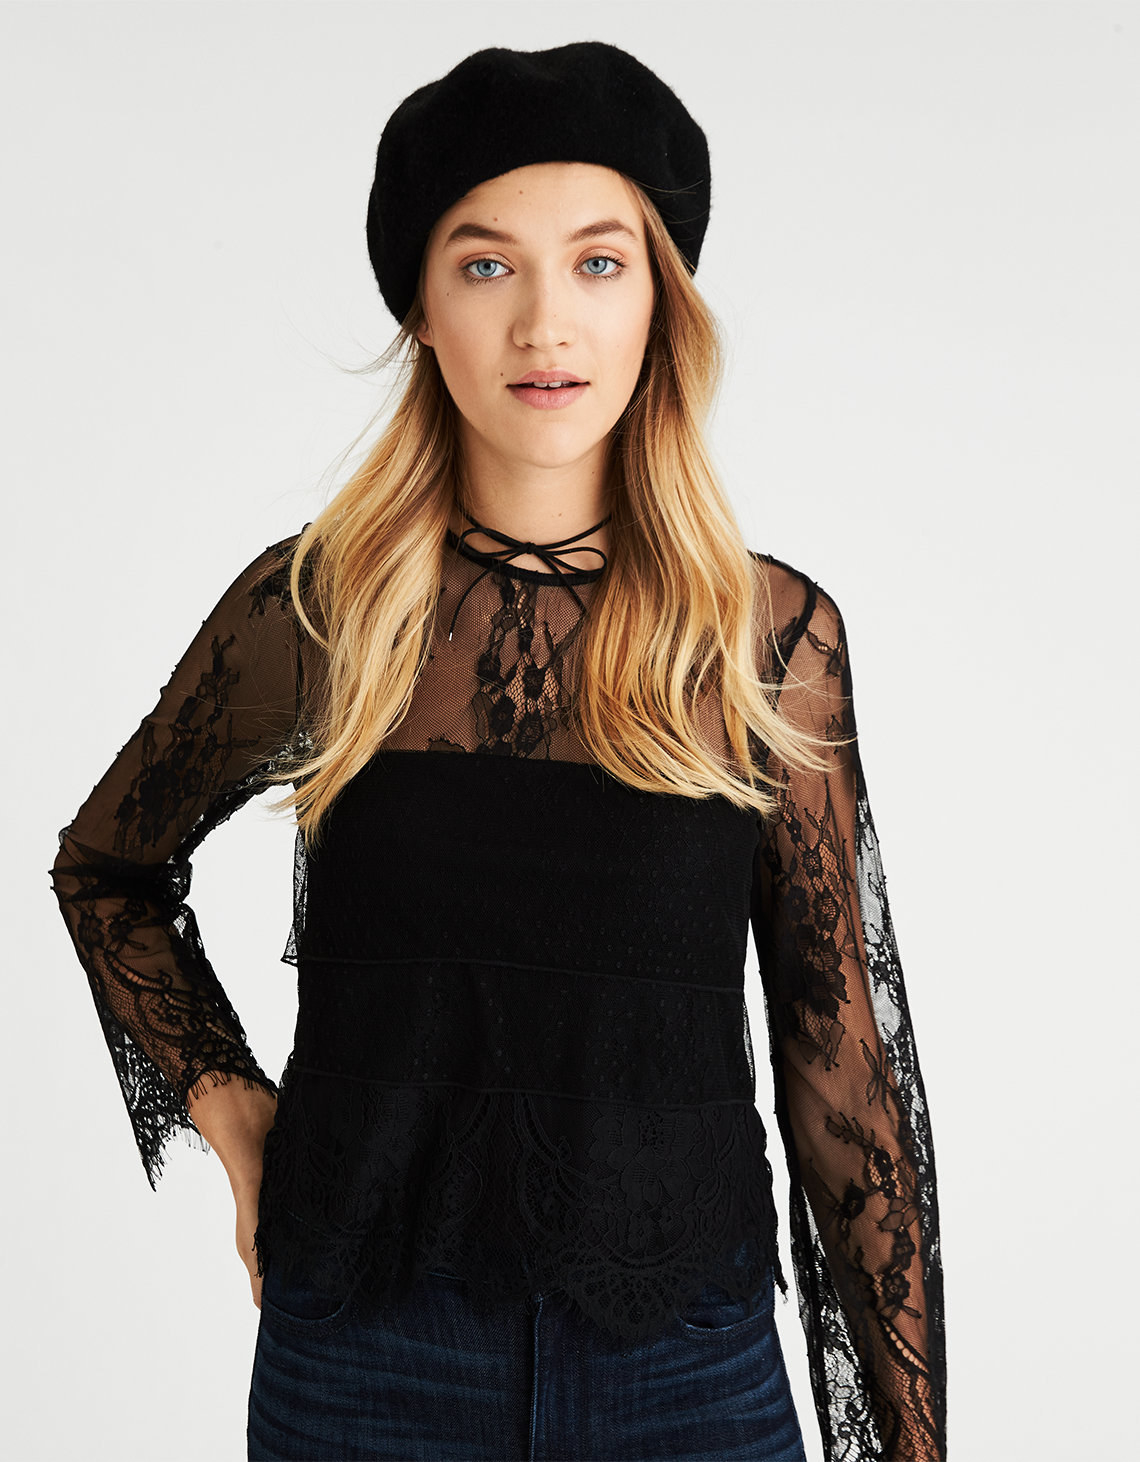 38 Amazing Things To Buy At American Eagle's 40% Off Sale